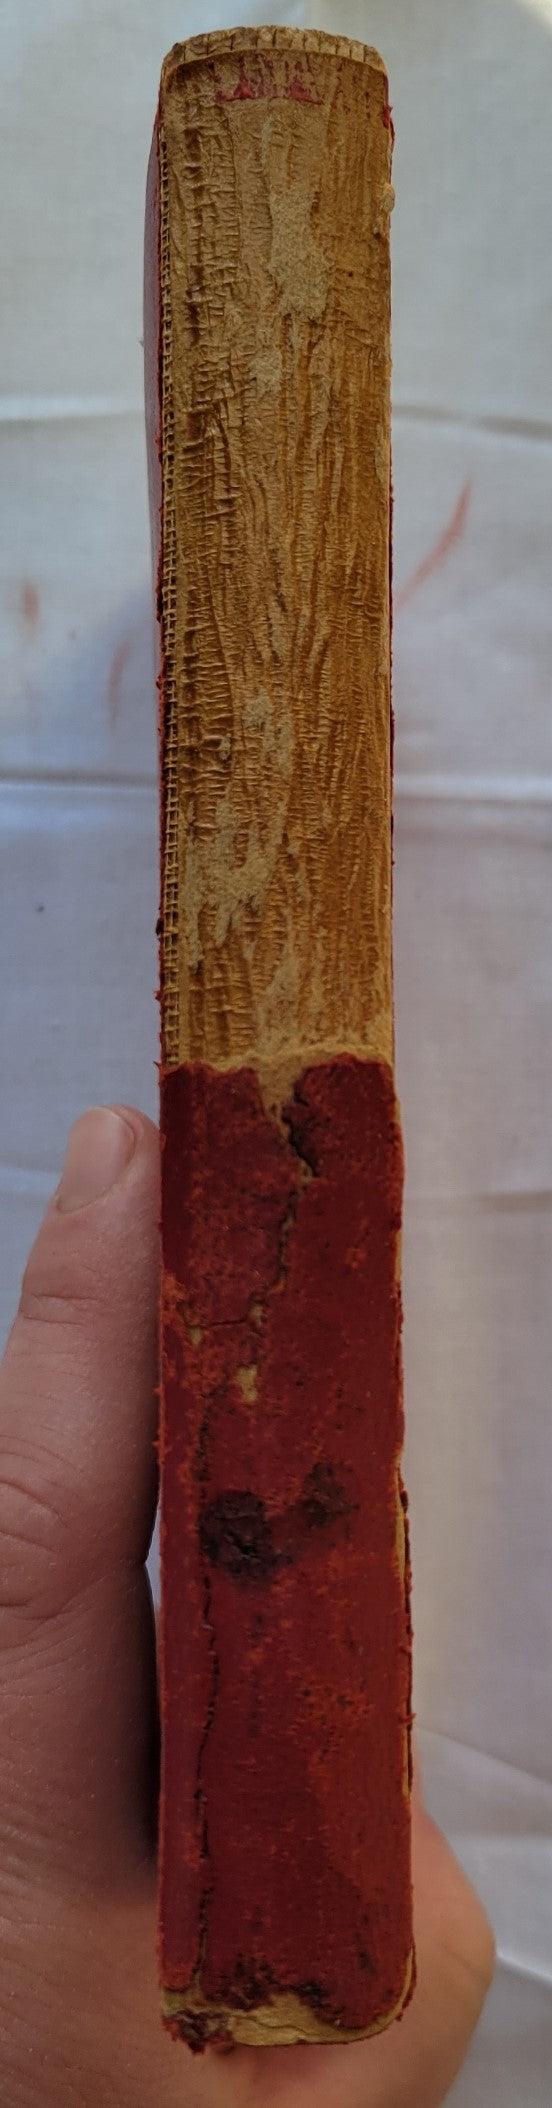 Antique book for sale, Homer's ancient Greek epic, The Odyssey translated by Alexander Pope, published by A. L. Burt Company (before 1932), with notes from Rev. Theodore Alois Buckley M.A. View of spine.